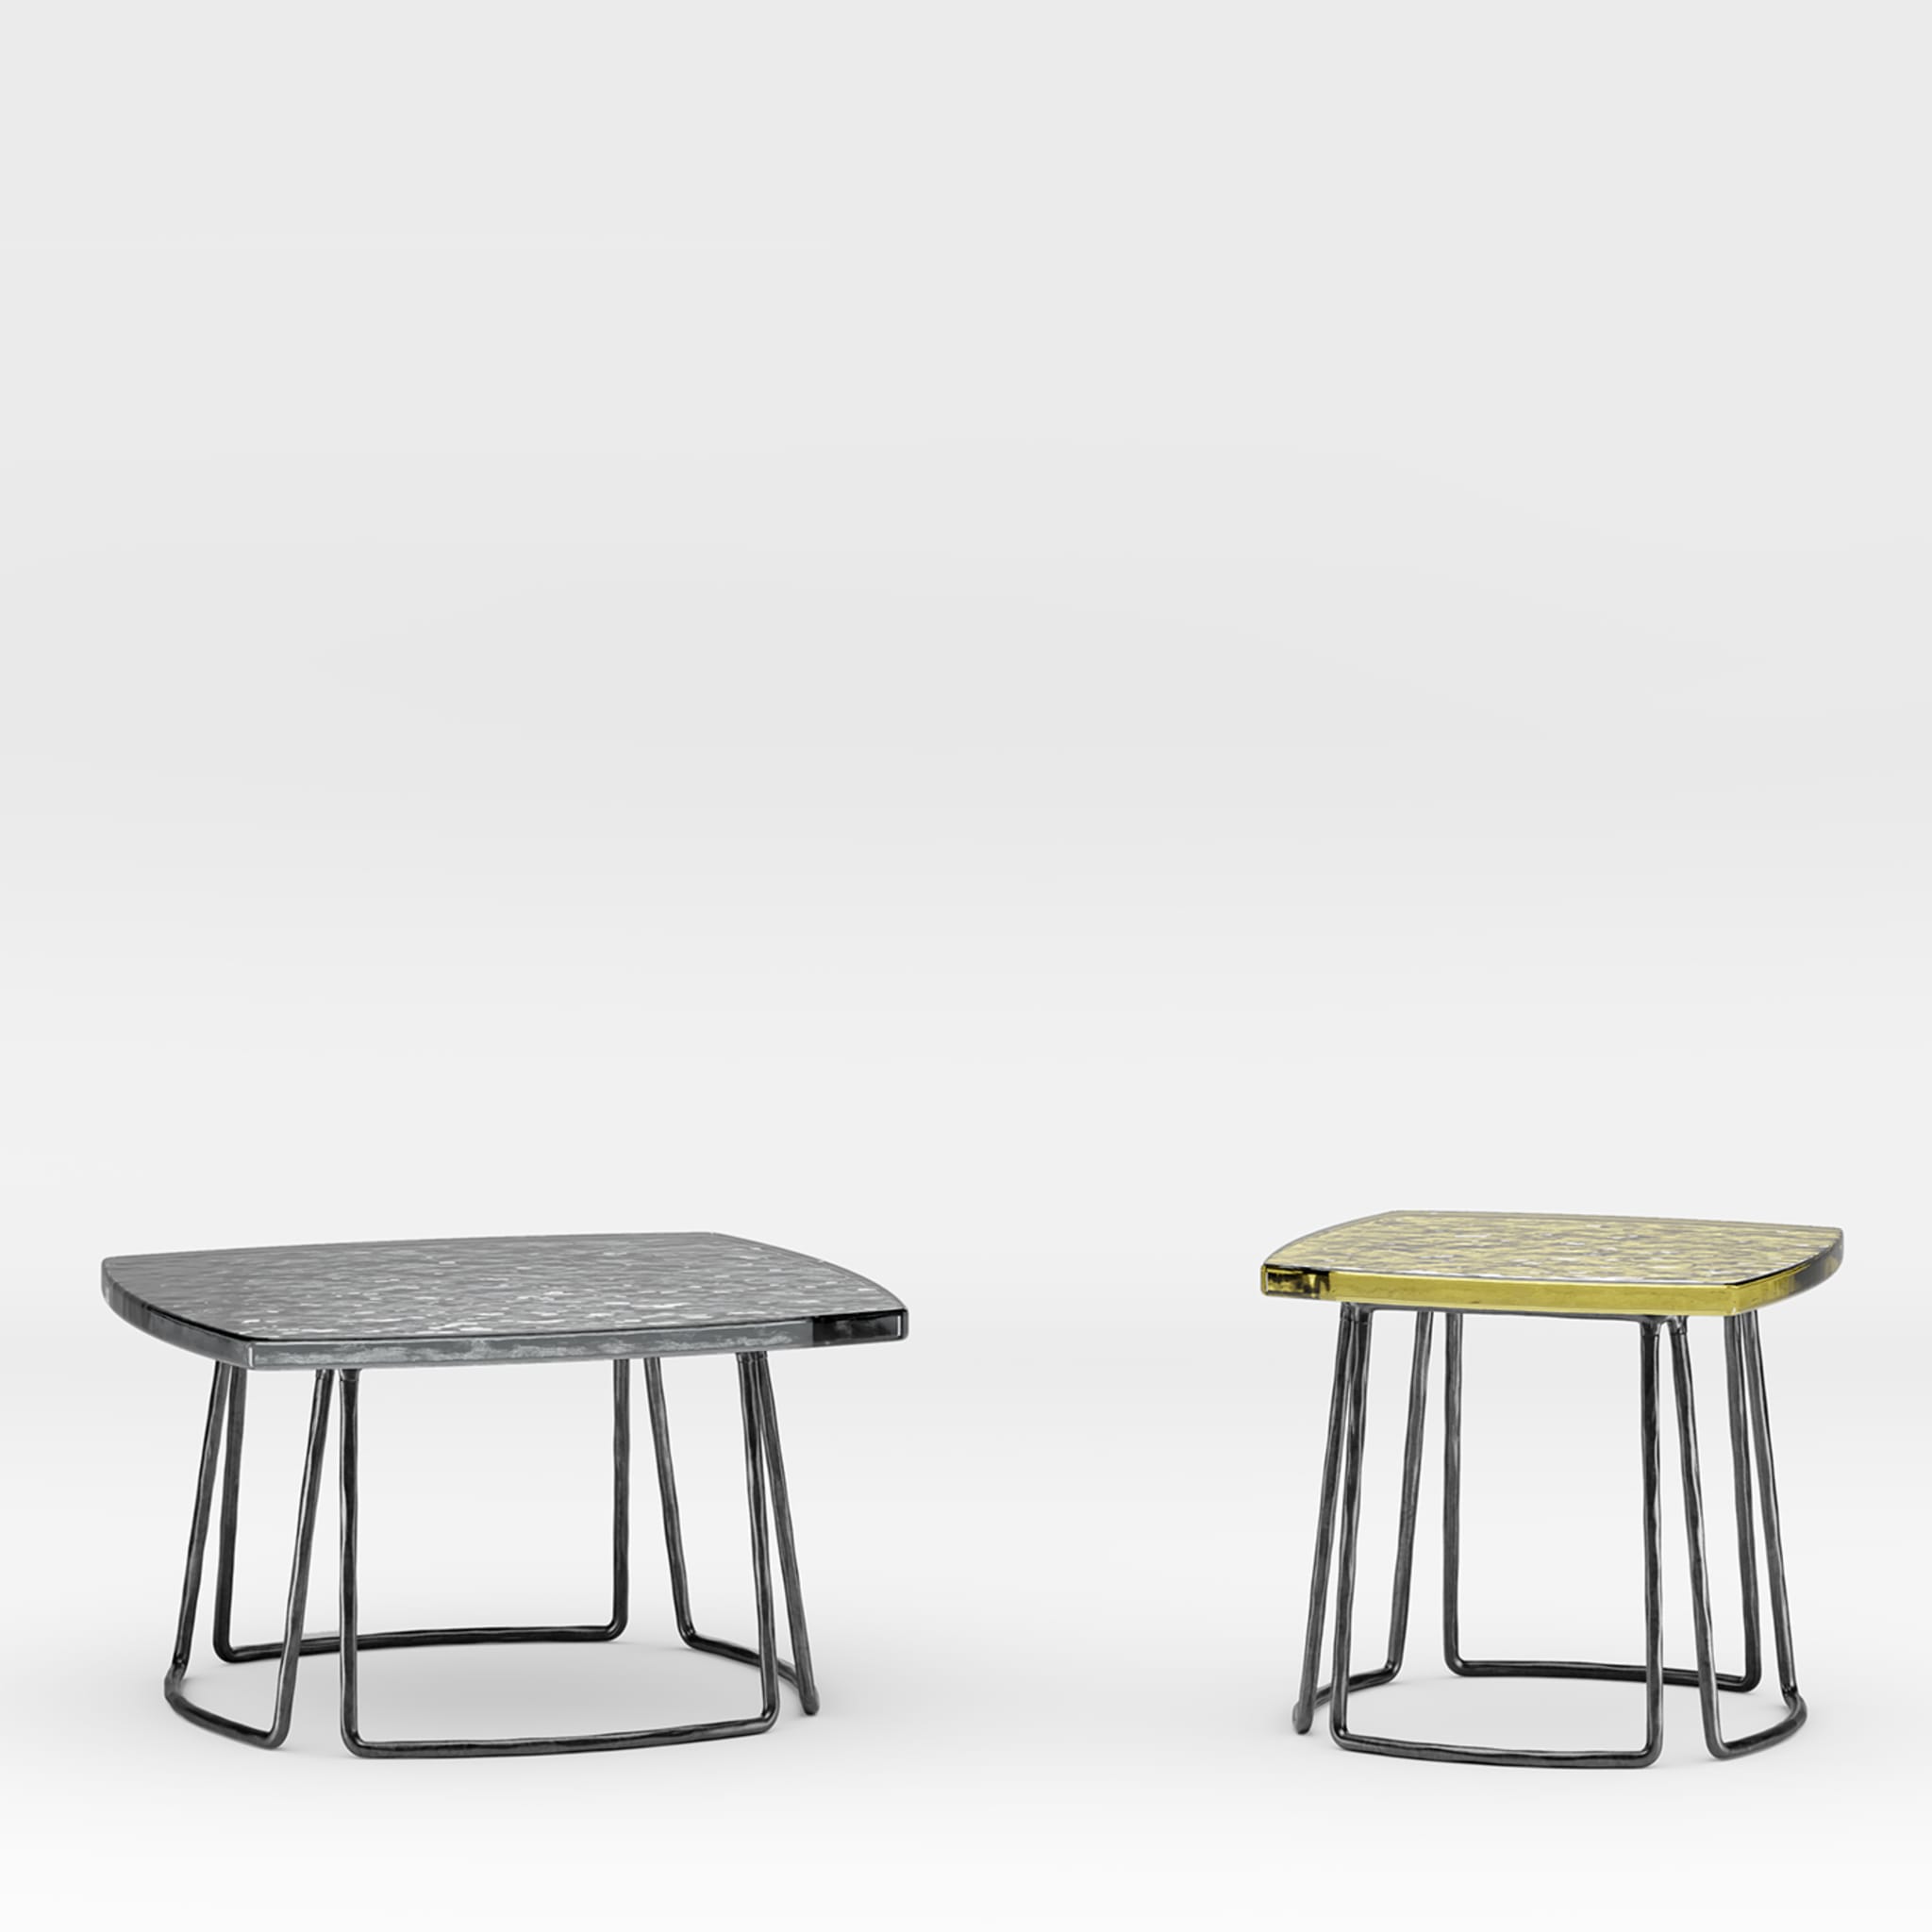 Type Small Silver Side Table by Stormo Studio - Alternative view 2